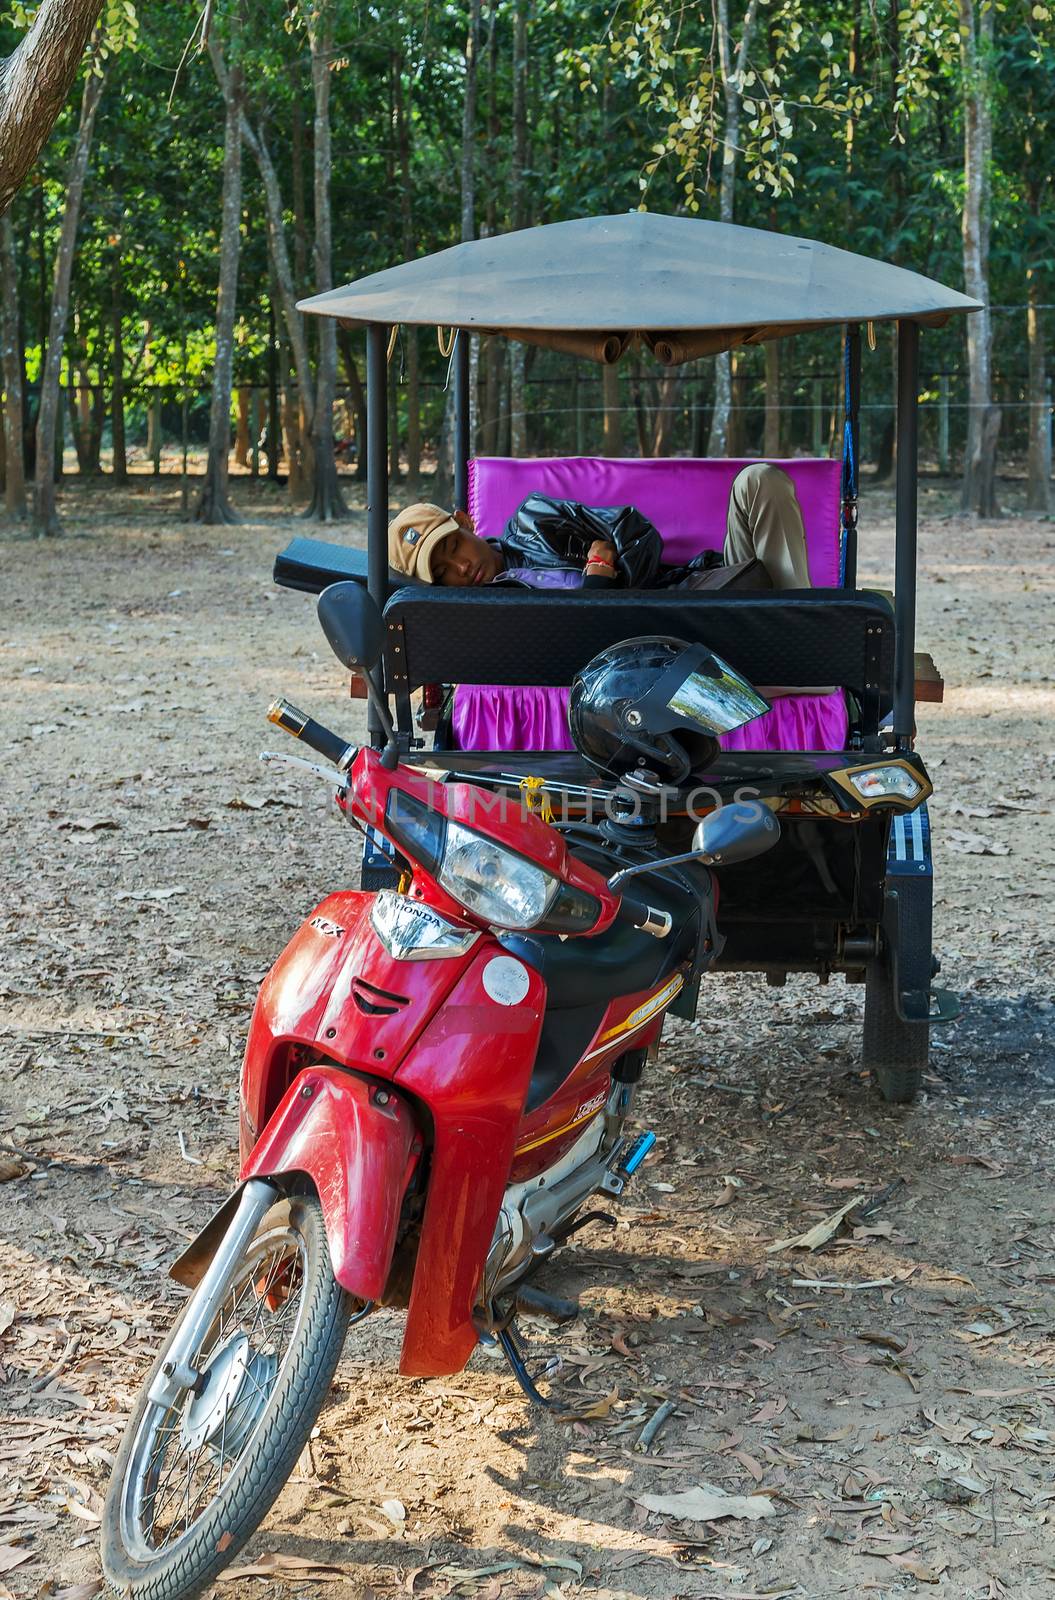 Siem Reap, Cambodia - 25 FEB, 2015: Asian rickshaw with no people in passes Taxi in Cambodia Tuk Tuk of Angkor Wat, Khmer temple complex, Asia.